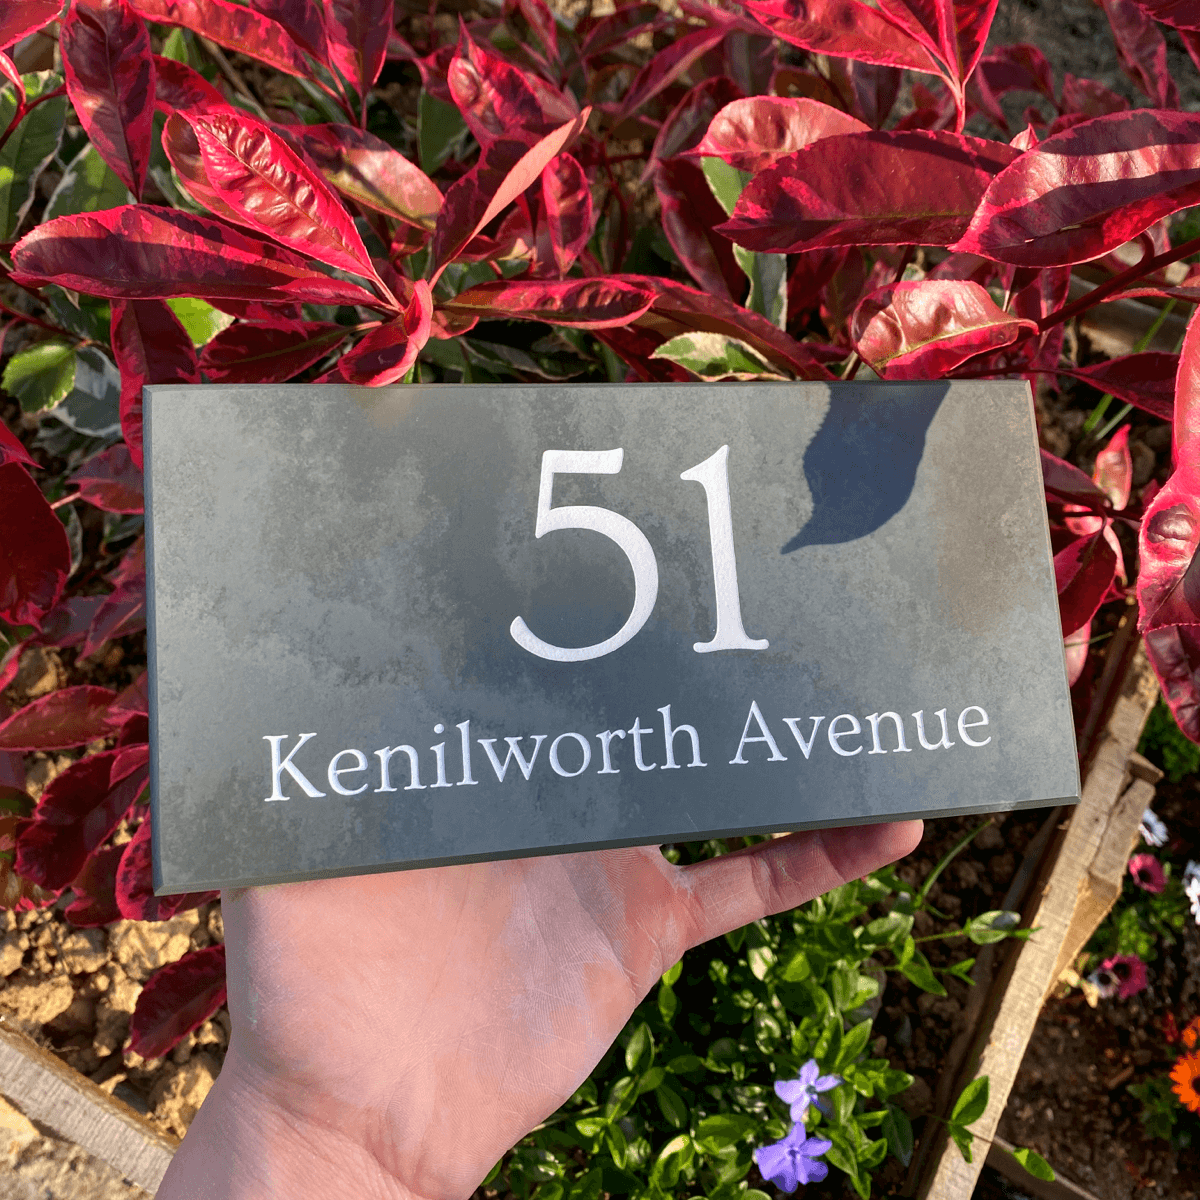 stunning slate house sign with house number and road name engraved and painted white. Sign is against red foliage